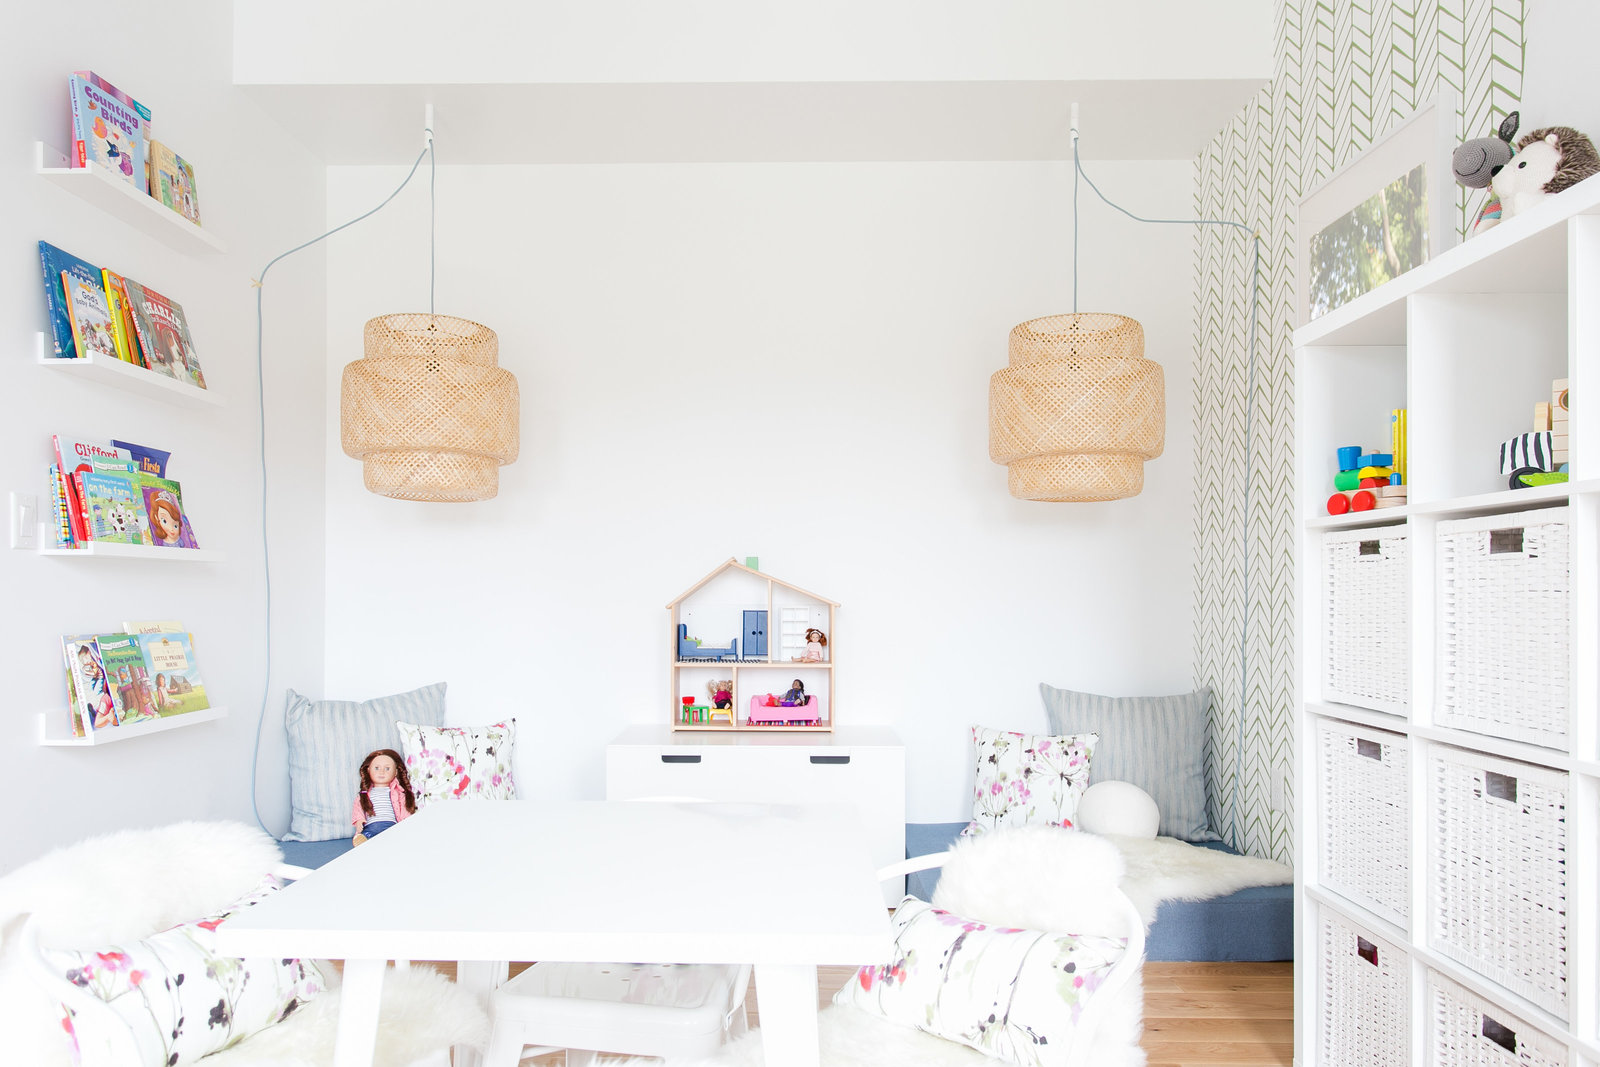 Fun playroom for kids with reading nook and storage solutions